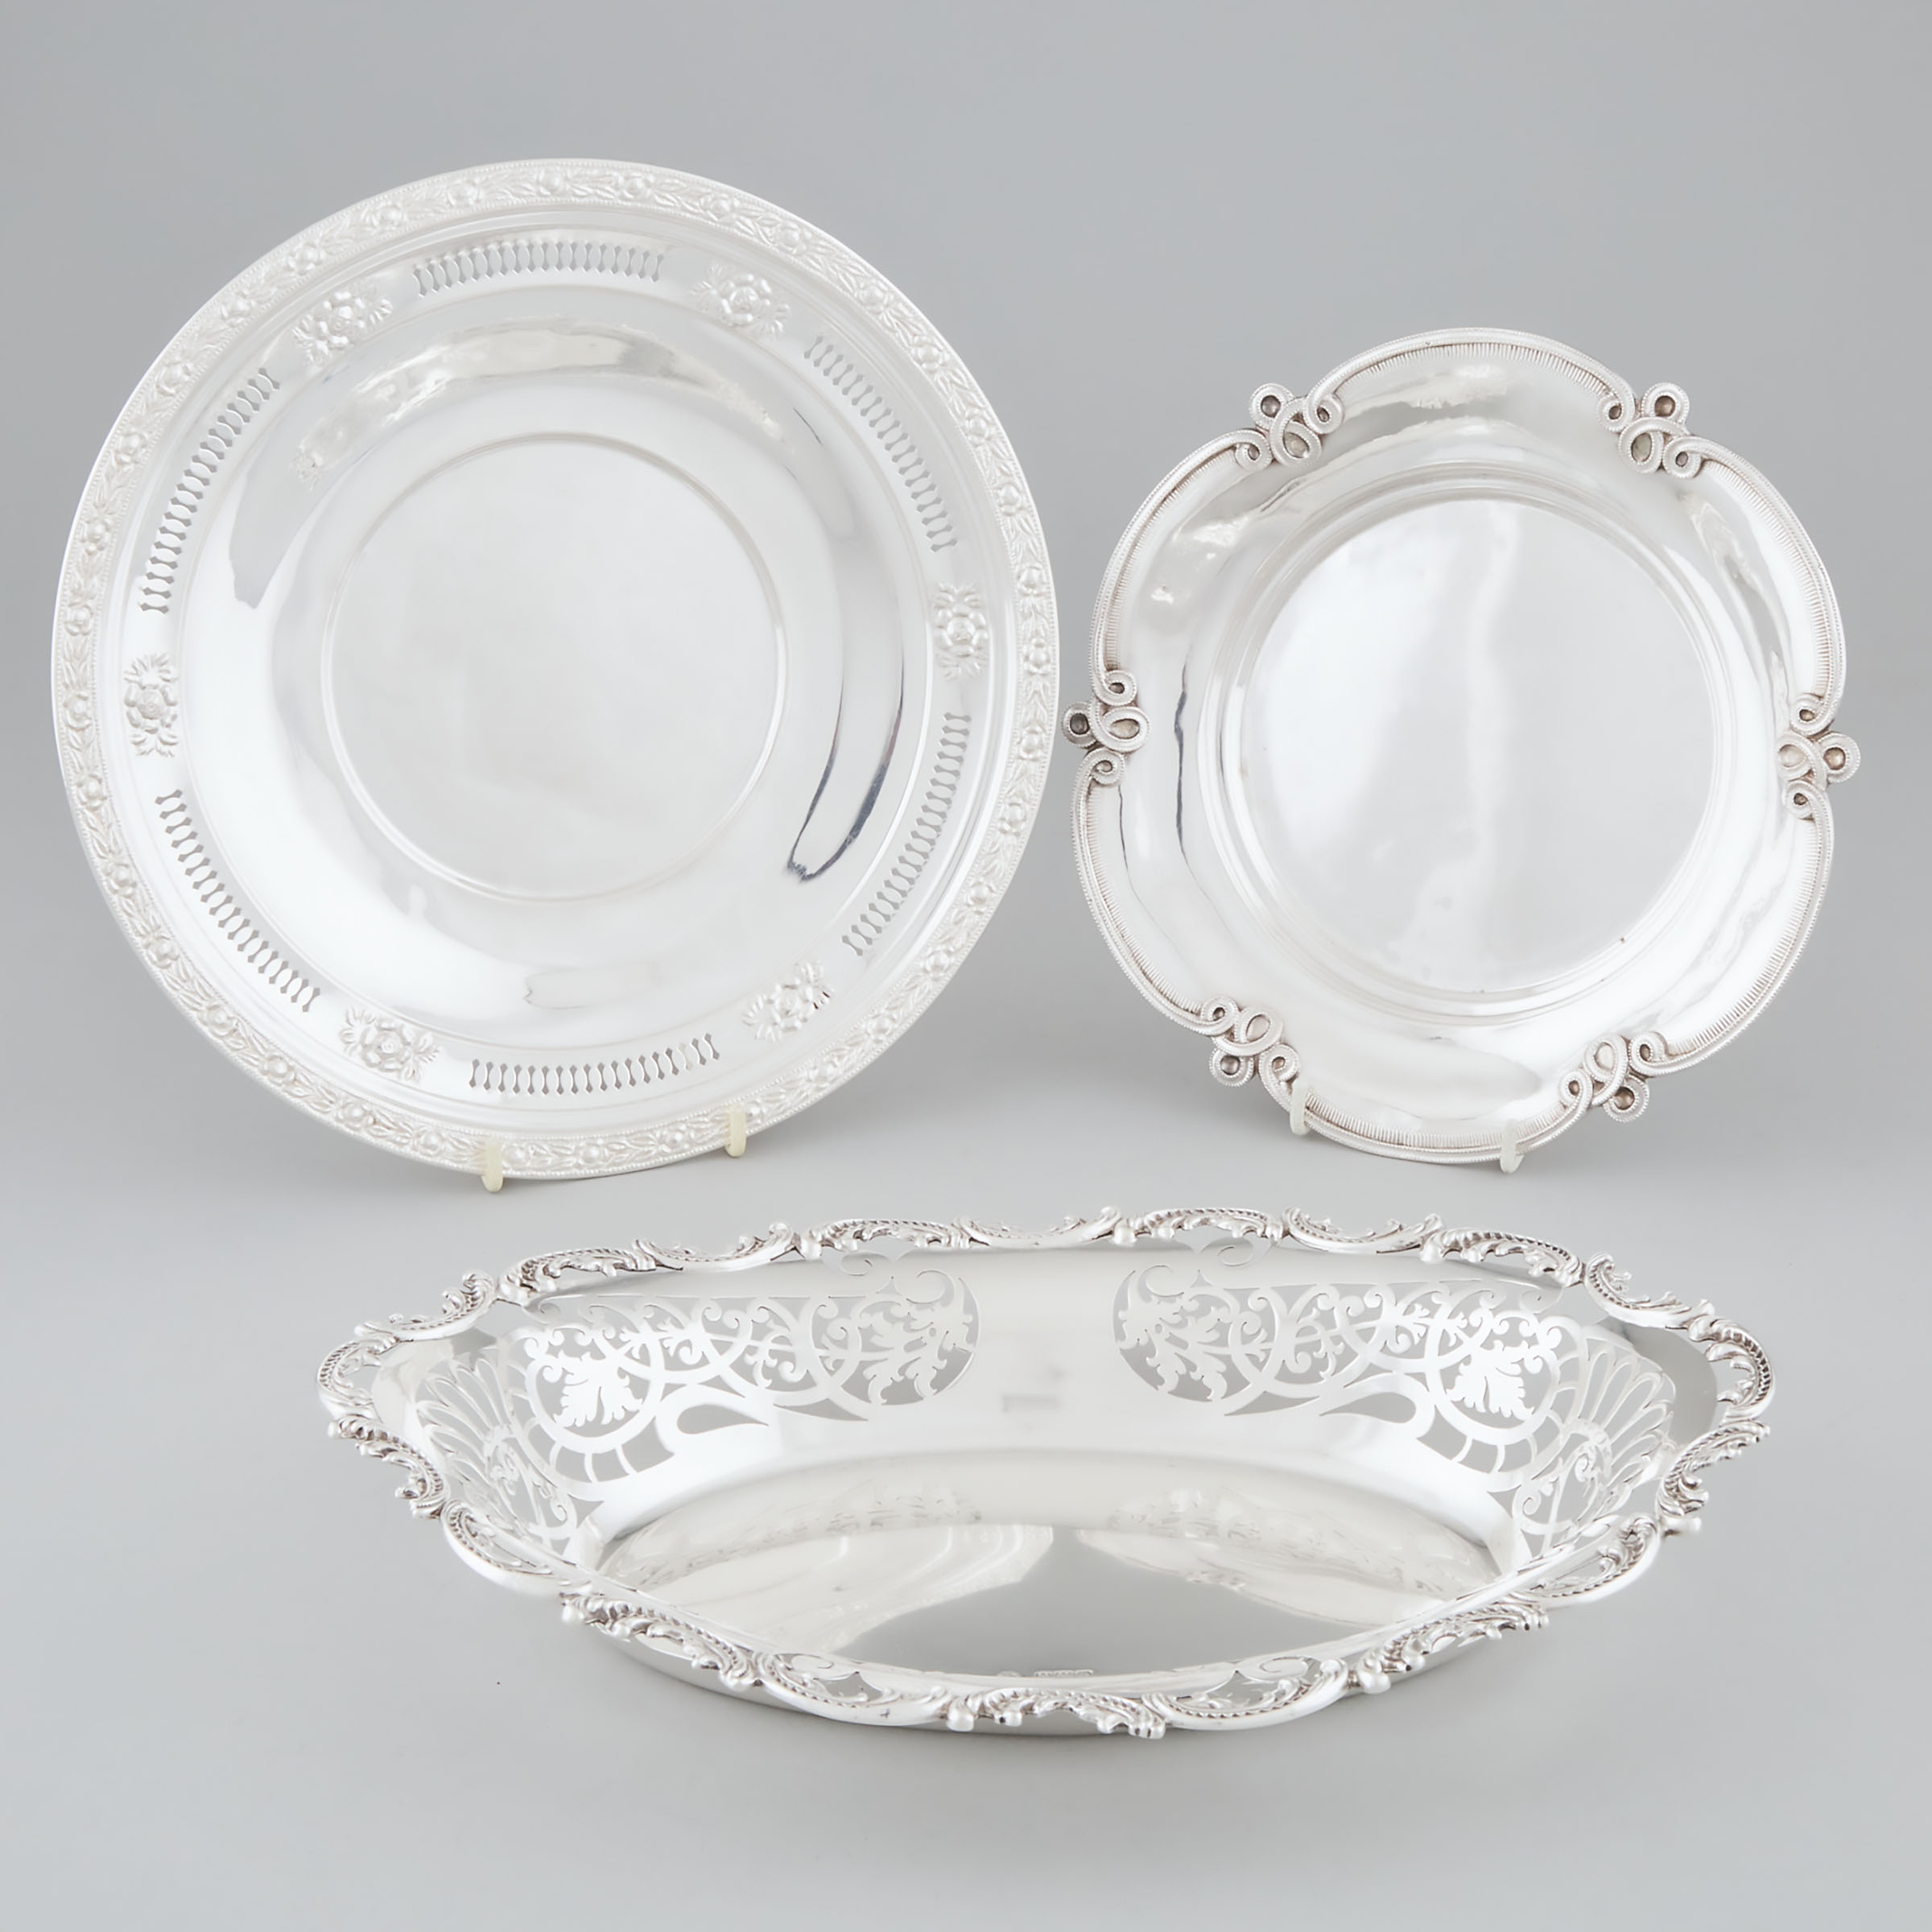 Edwardian Silver Pierced Oval Bread Dish, William Hutton & Sons, London, 1901, together with a German Silver Shaped Circular Dish and a North American Cake Plate, late 19th/early 20th century